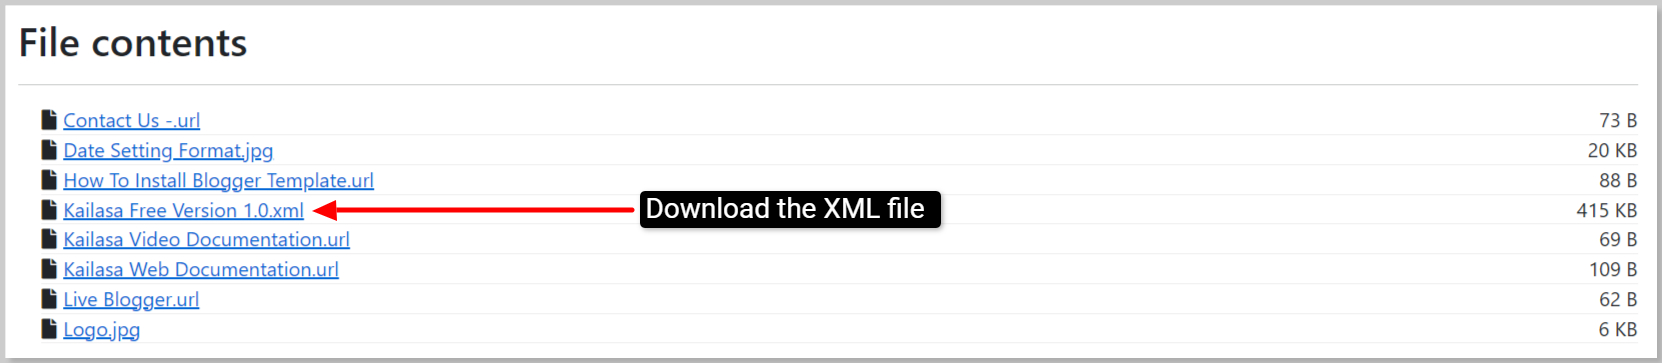 Download XML file from Unzip tool to upload on Blogger